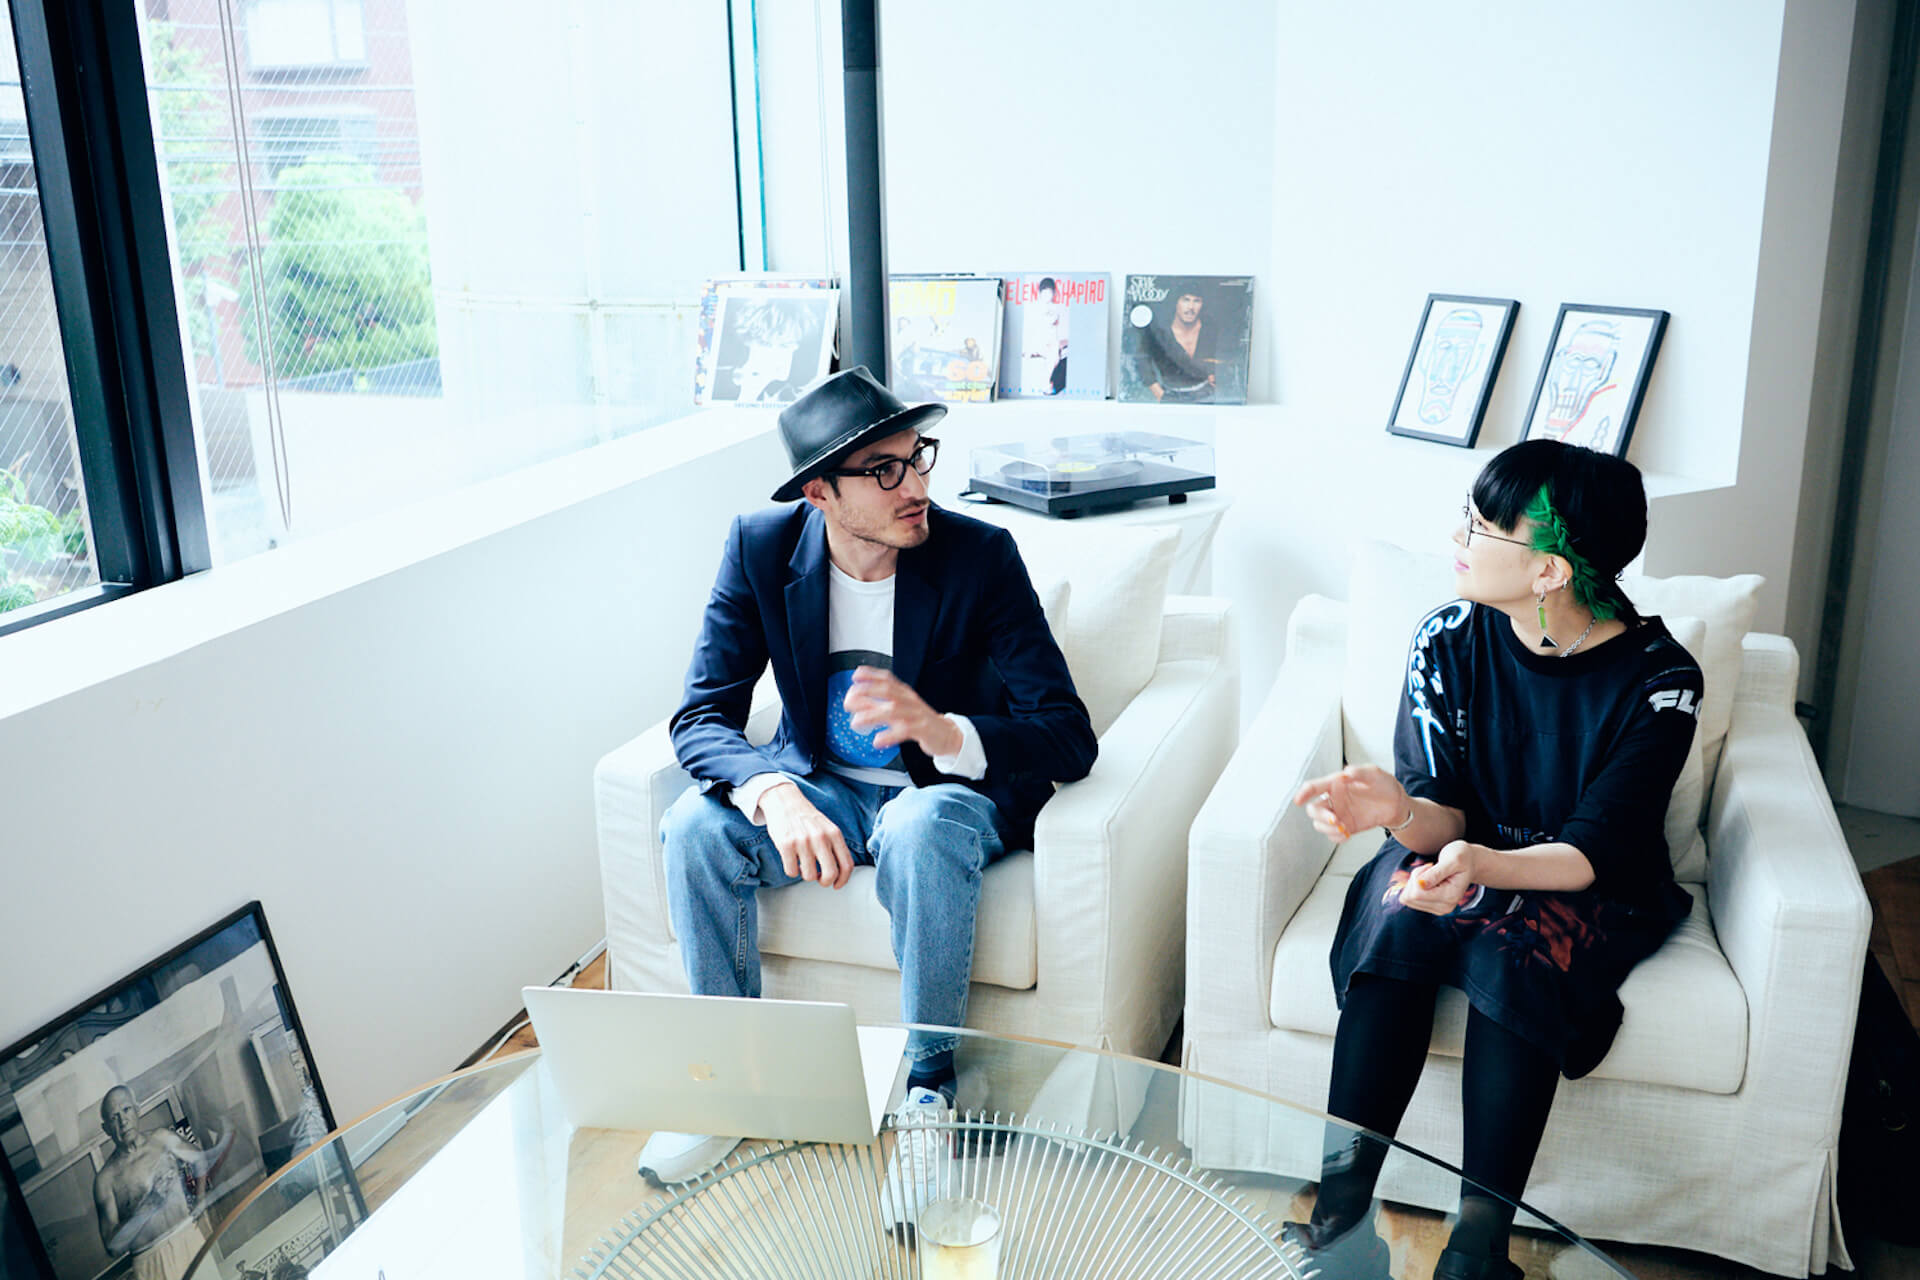 Young Juvenile Youth・ゆう姫とagnès b.・クリストファーに訊く、いまバイナルでコラボレートする理由 interview-yjymusic-3